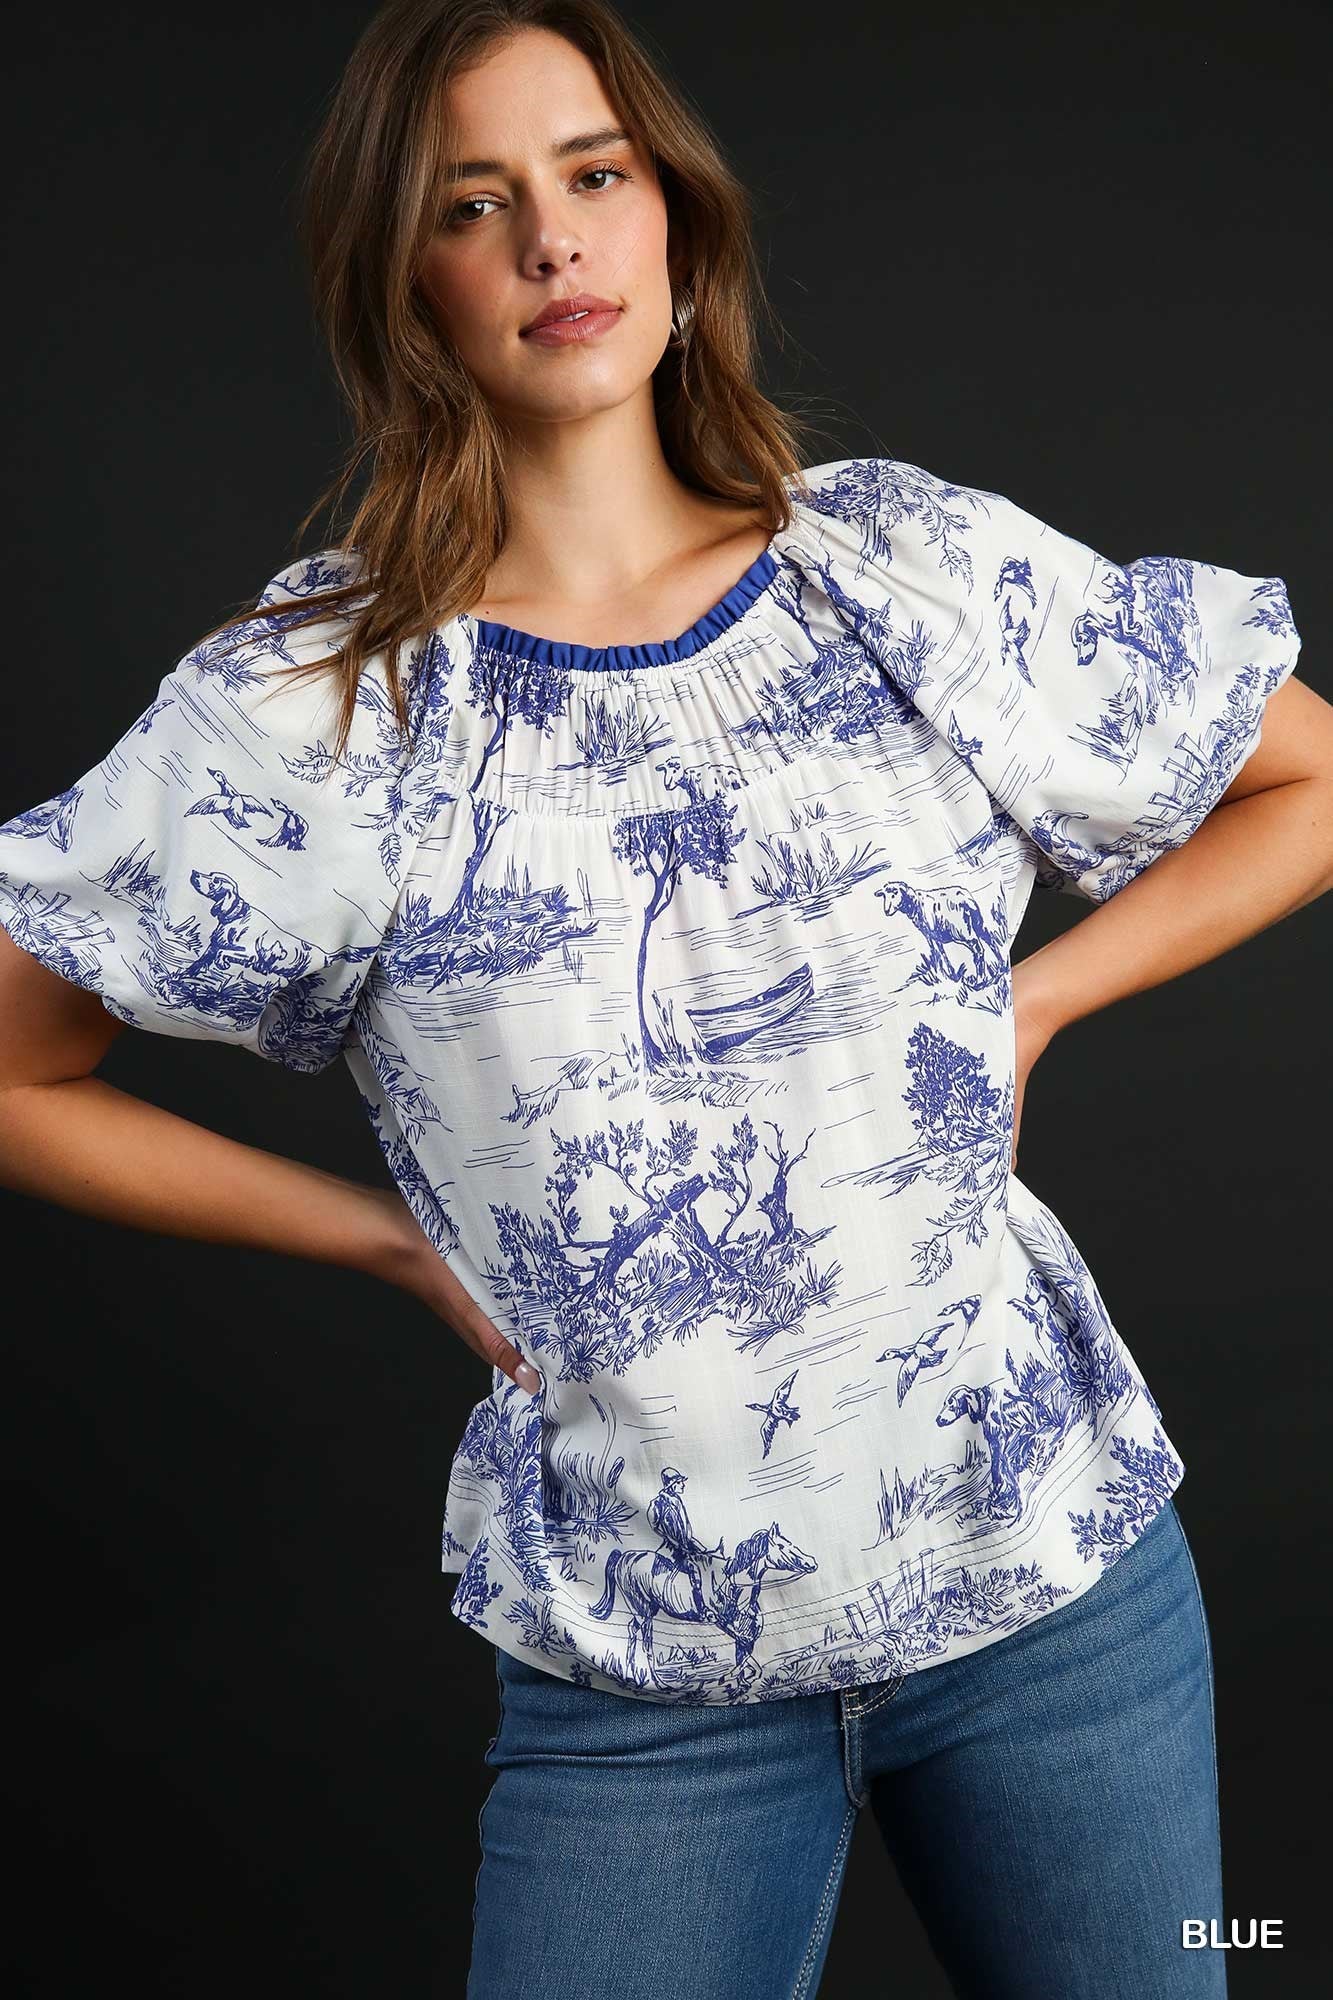 The Landscape Top in Blue